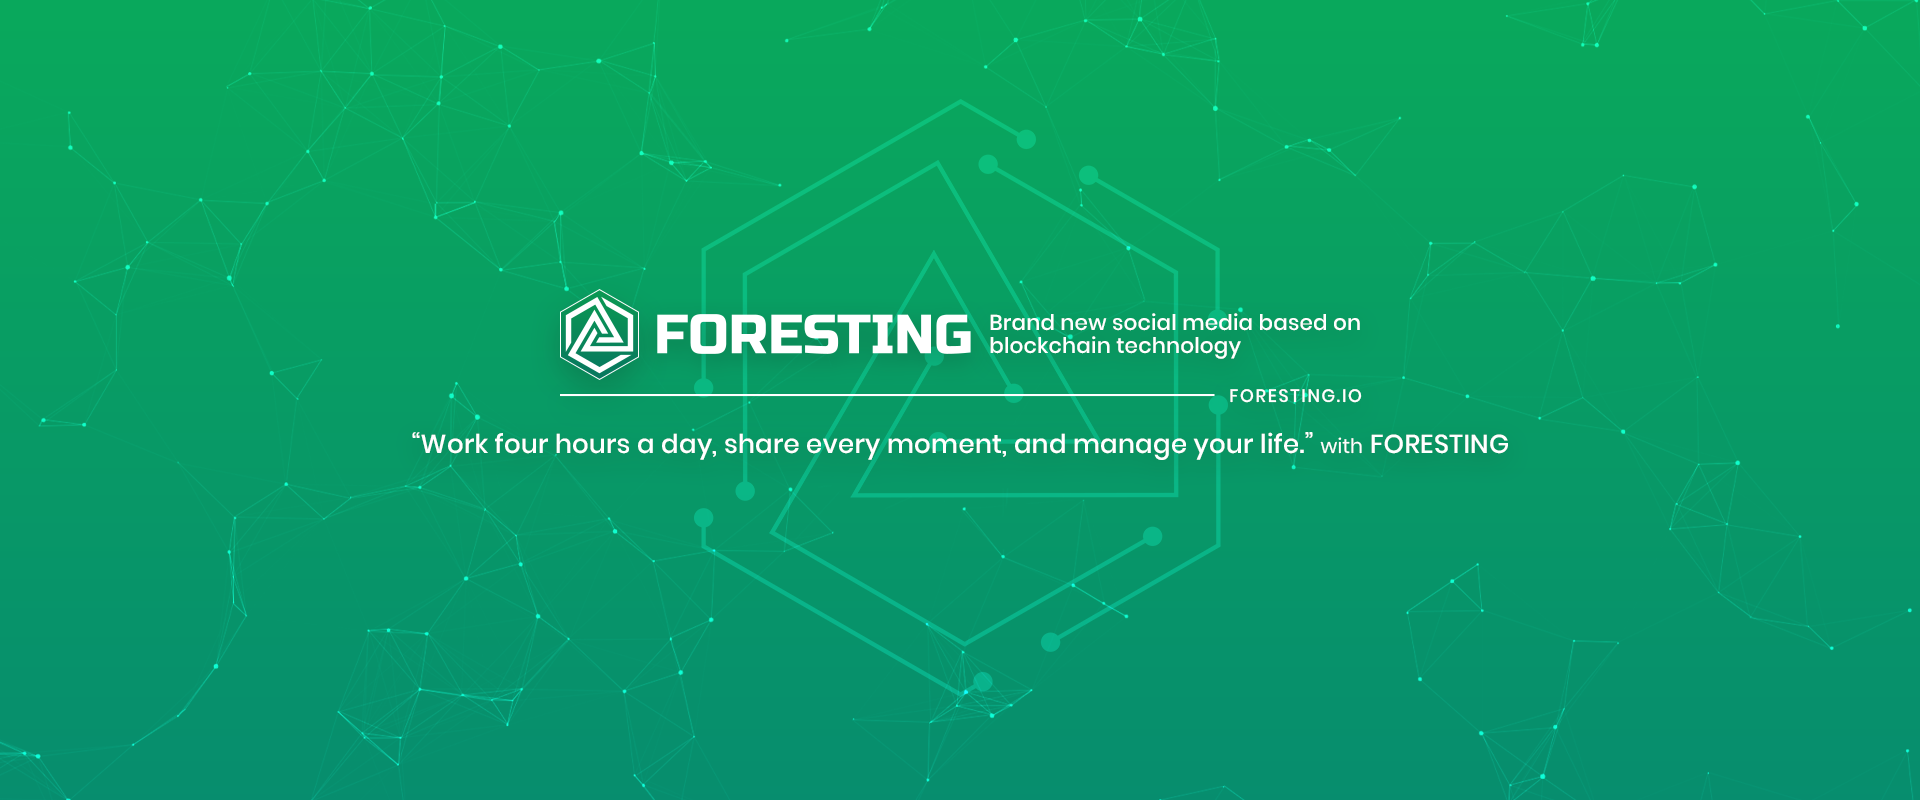 foresting-ico-review-1.png